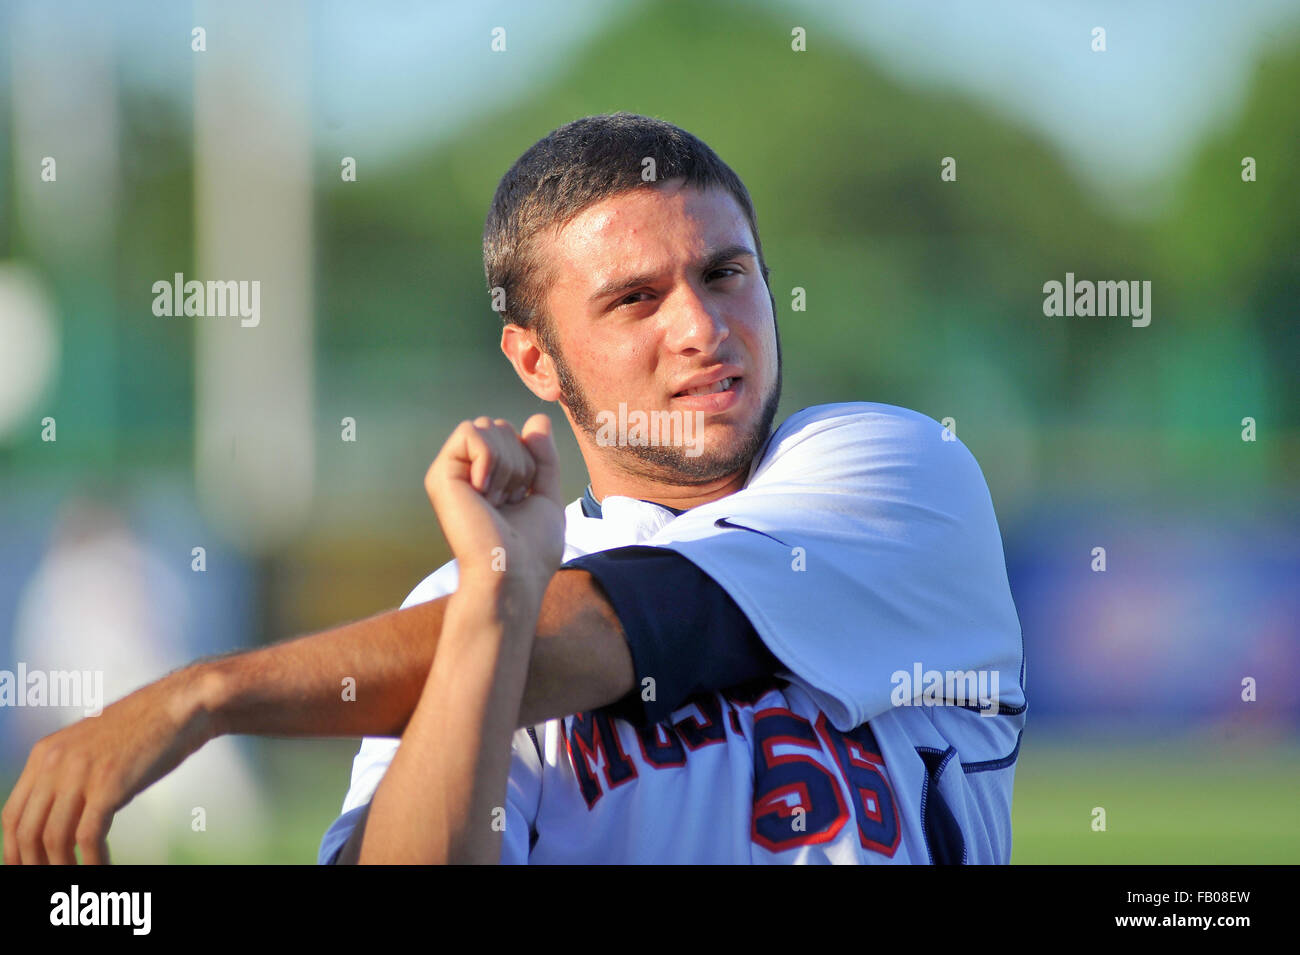 High school player stretching and warming up prior to the start of a state playoff baseball game. USA. Stock Photo